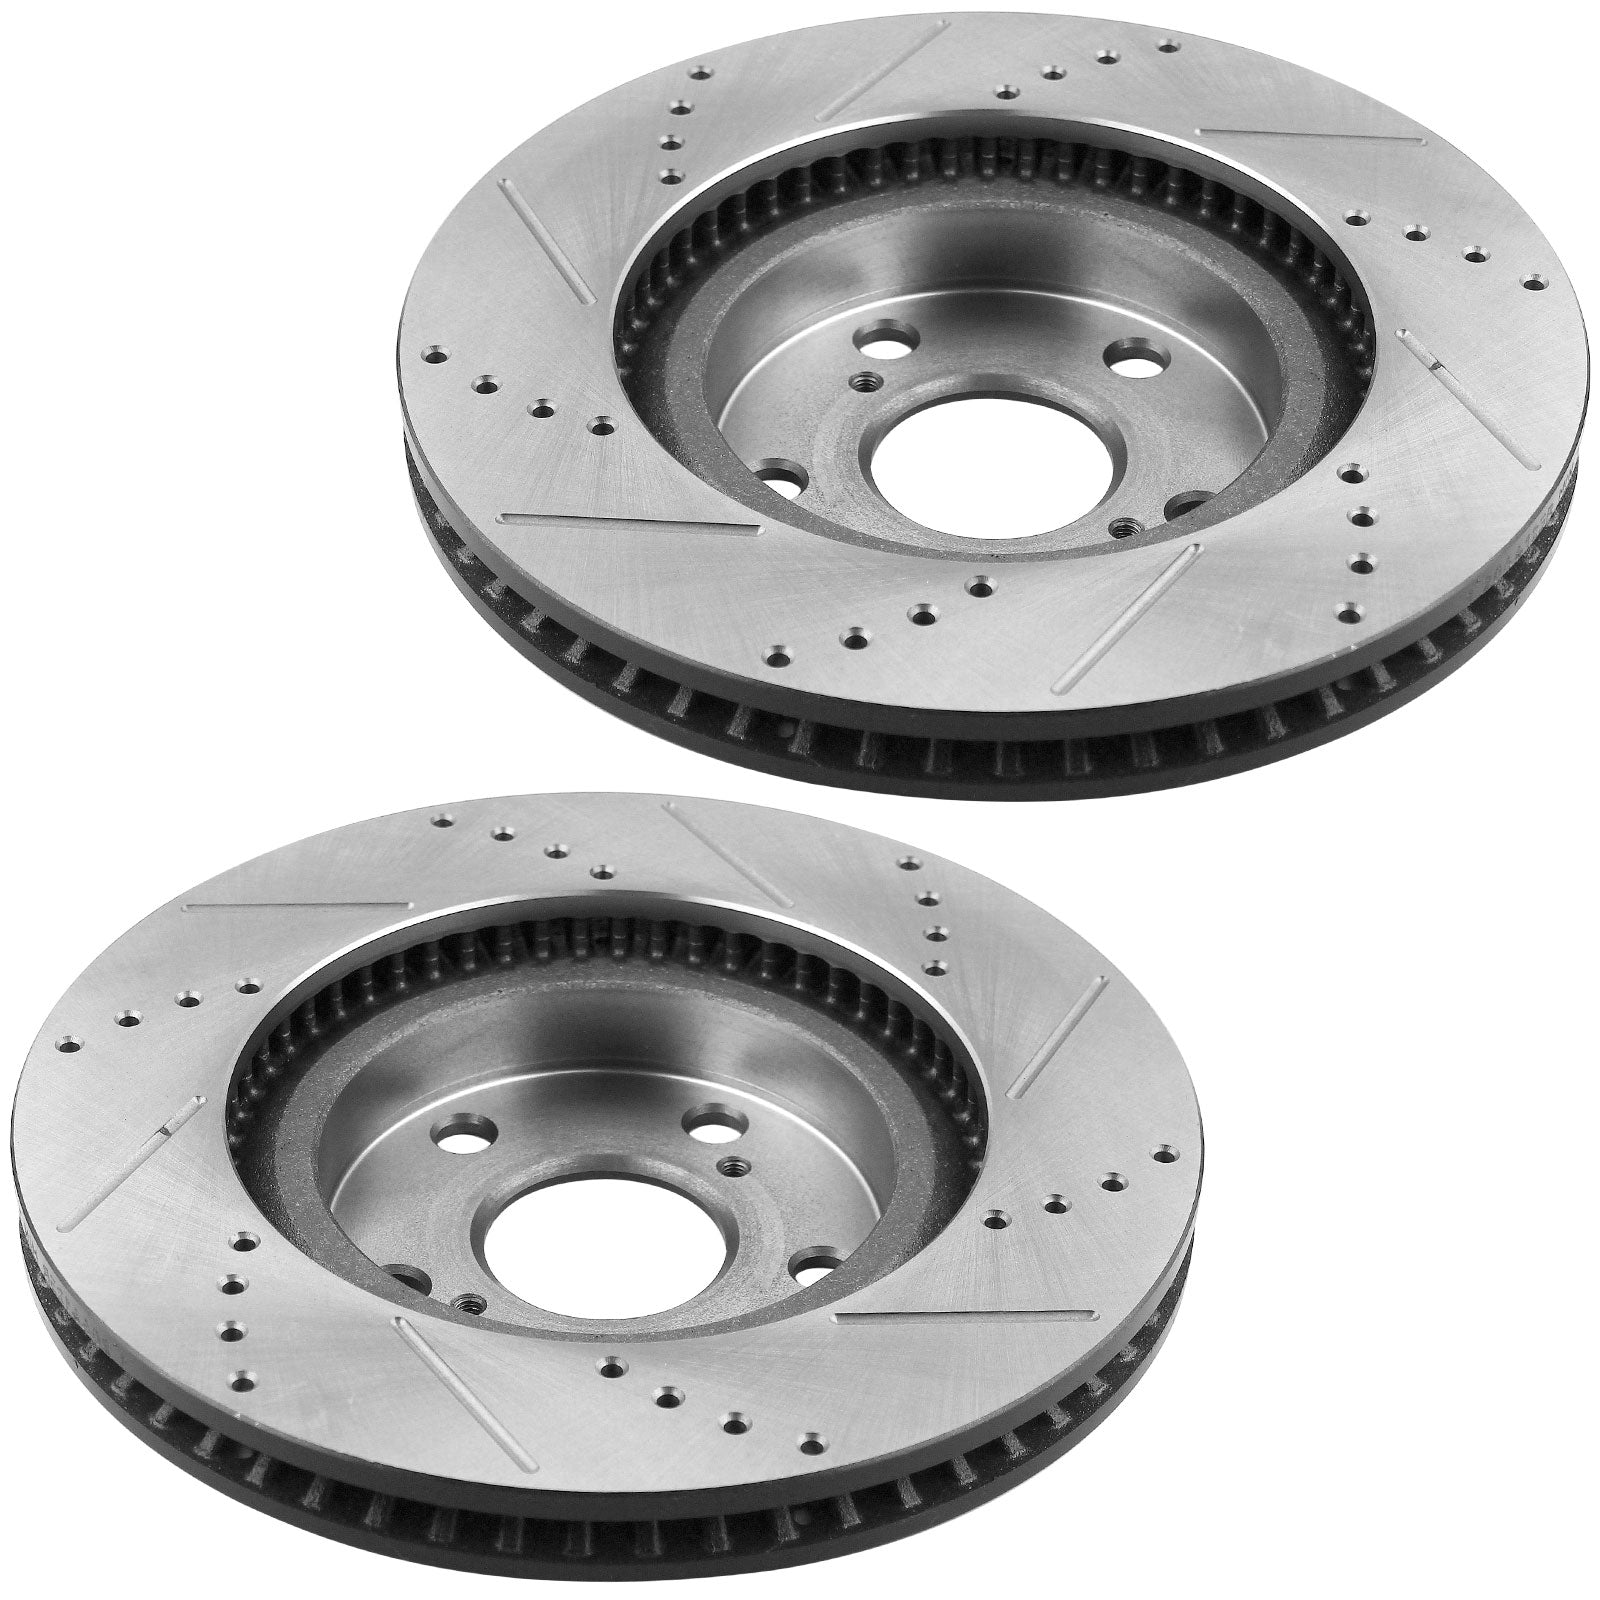 Front Drilled & Slotted Disc Brake Rotors + Ceramic Pads Fits for Lexus ES300 IS250, Toyota Avalon Camry Sienna Solara-5-Lug Wheel Holes MotorbyMotor